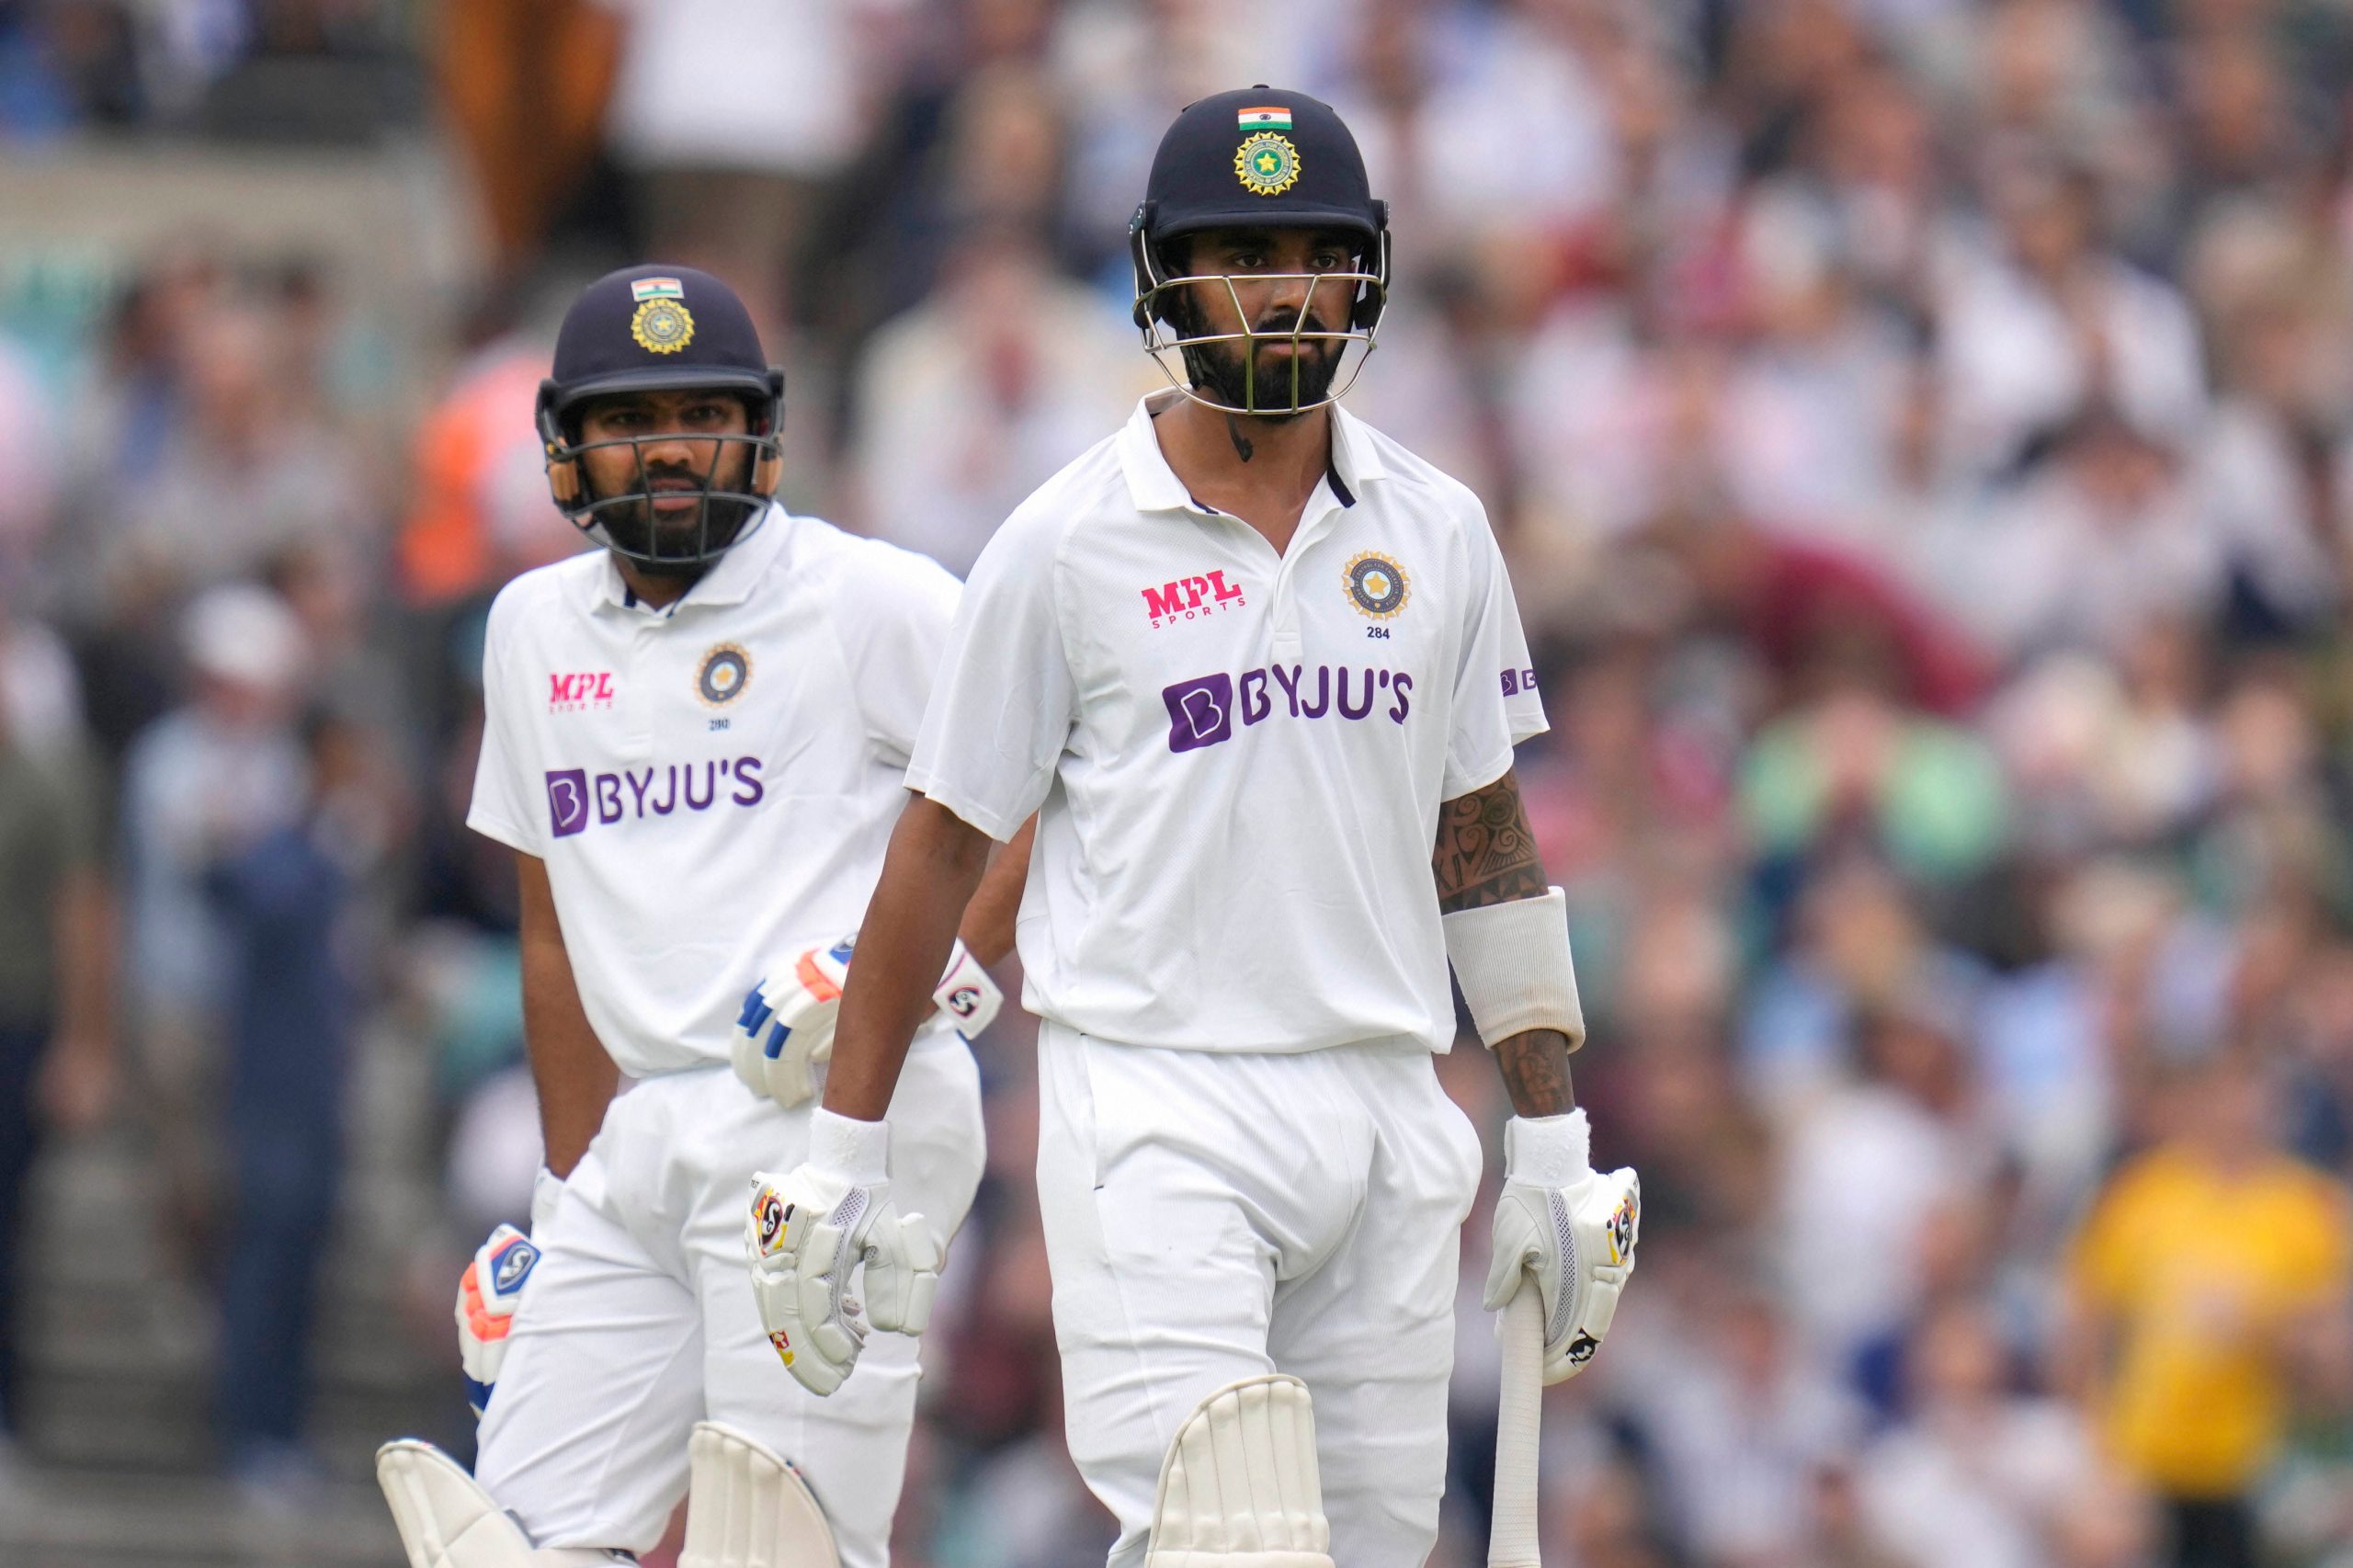 KL Rahul fined 15% of his match fees for breaching ICC Code of Conduct